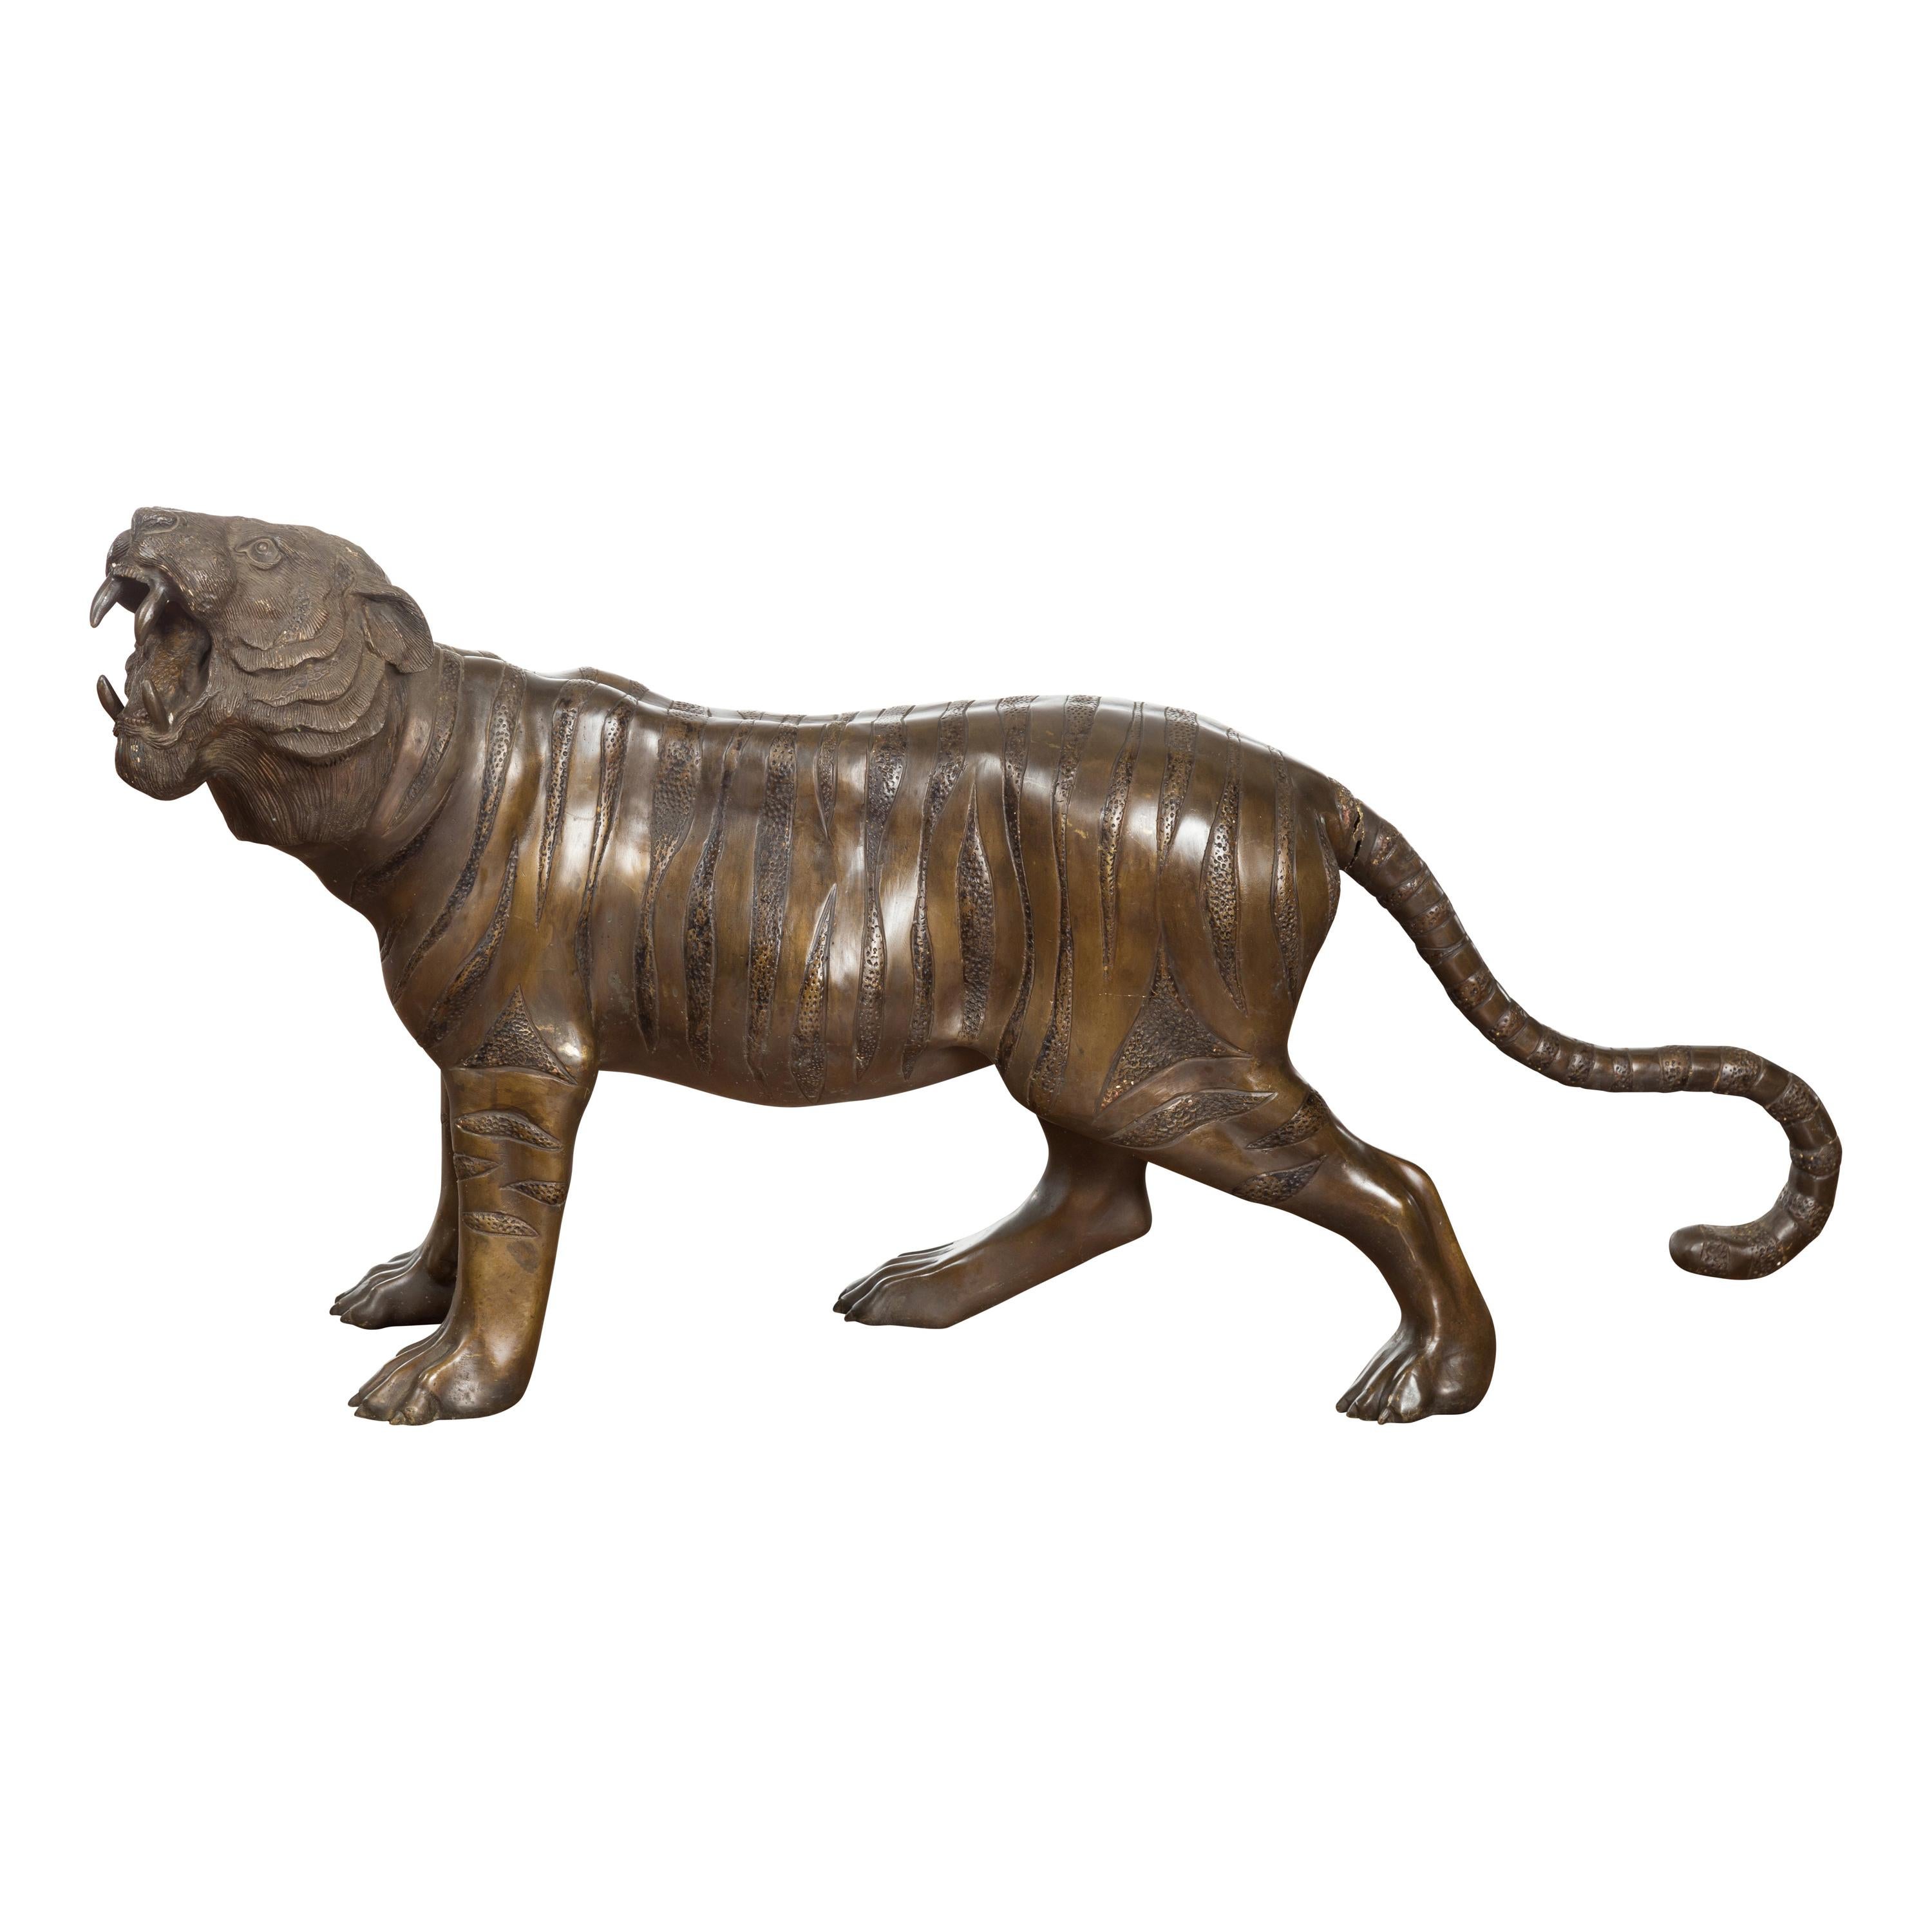 Vintage Cast Bronze Statue of a Roaring Tiger with Textured Finish